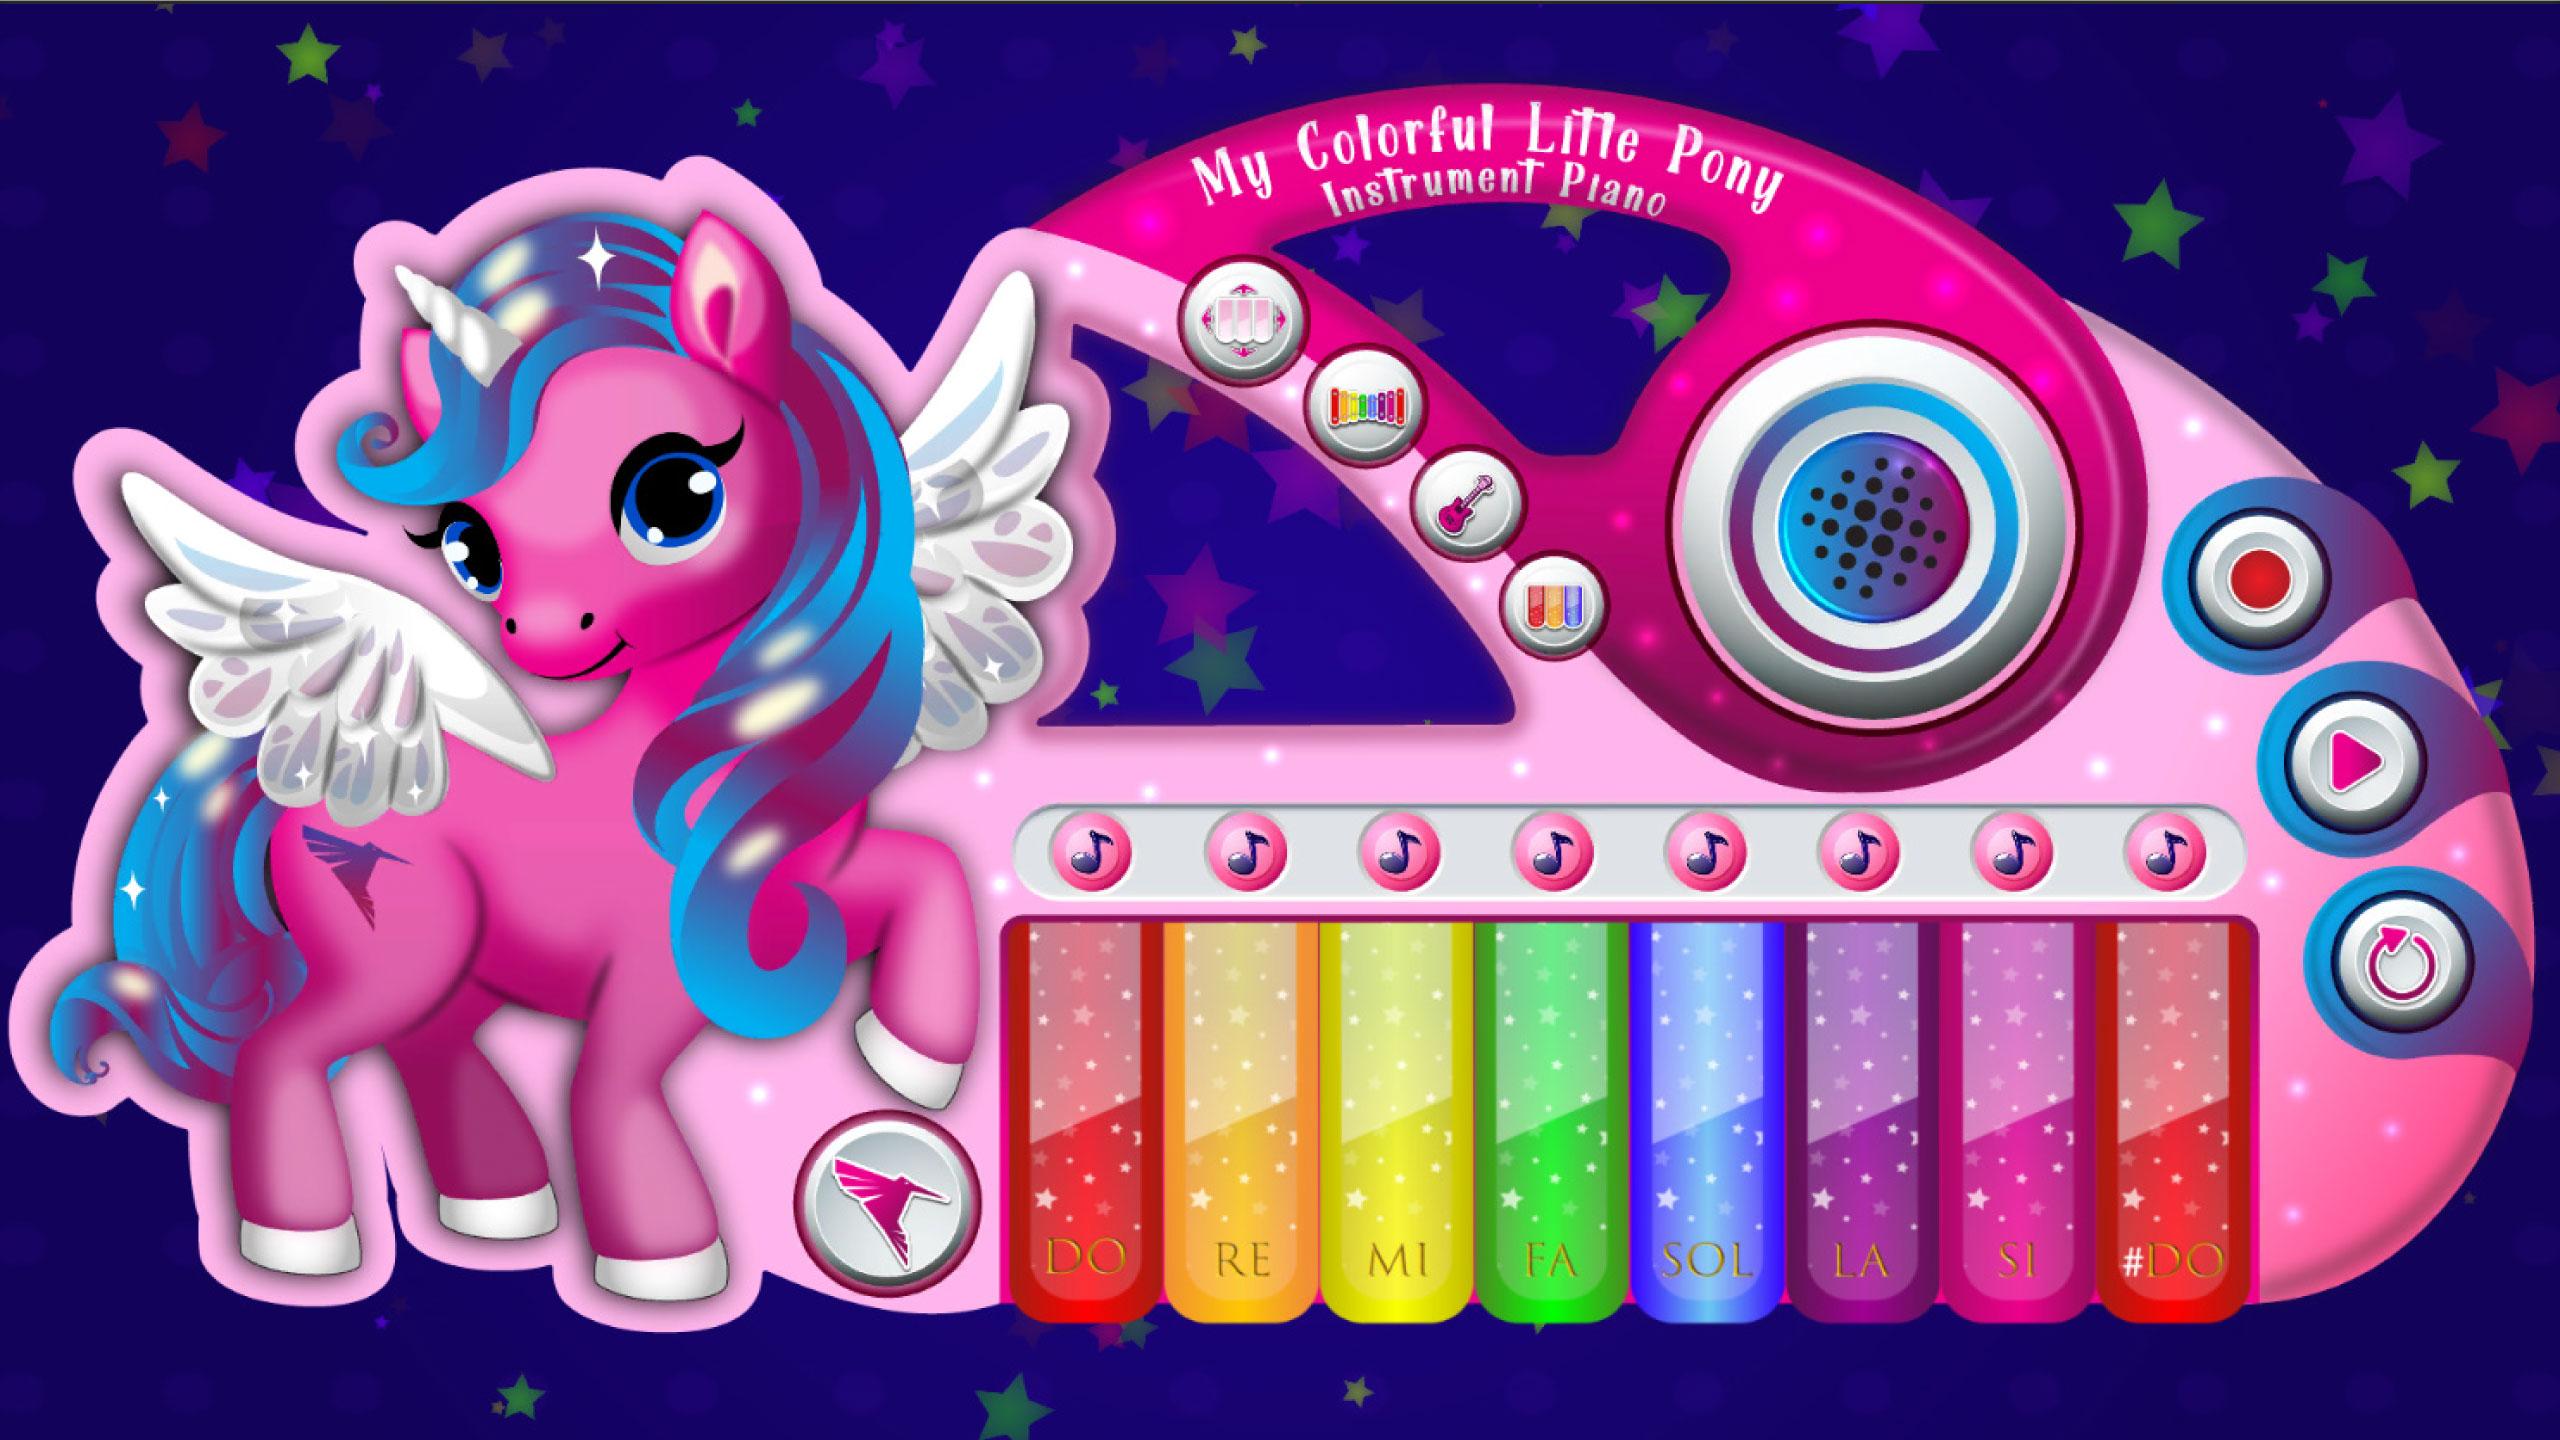 My Colorful Litle Pony Instrument - Piano 2.0 Screenshot 13